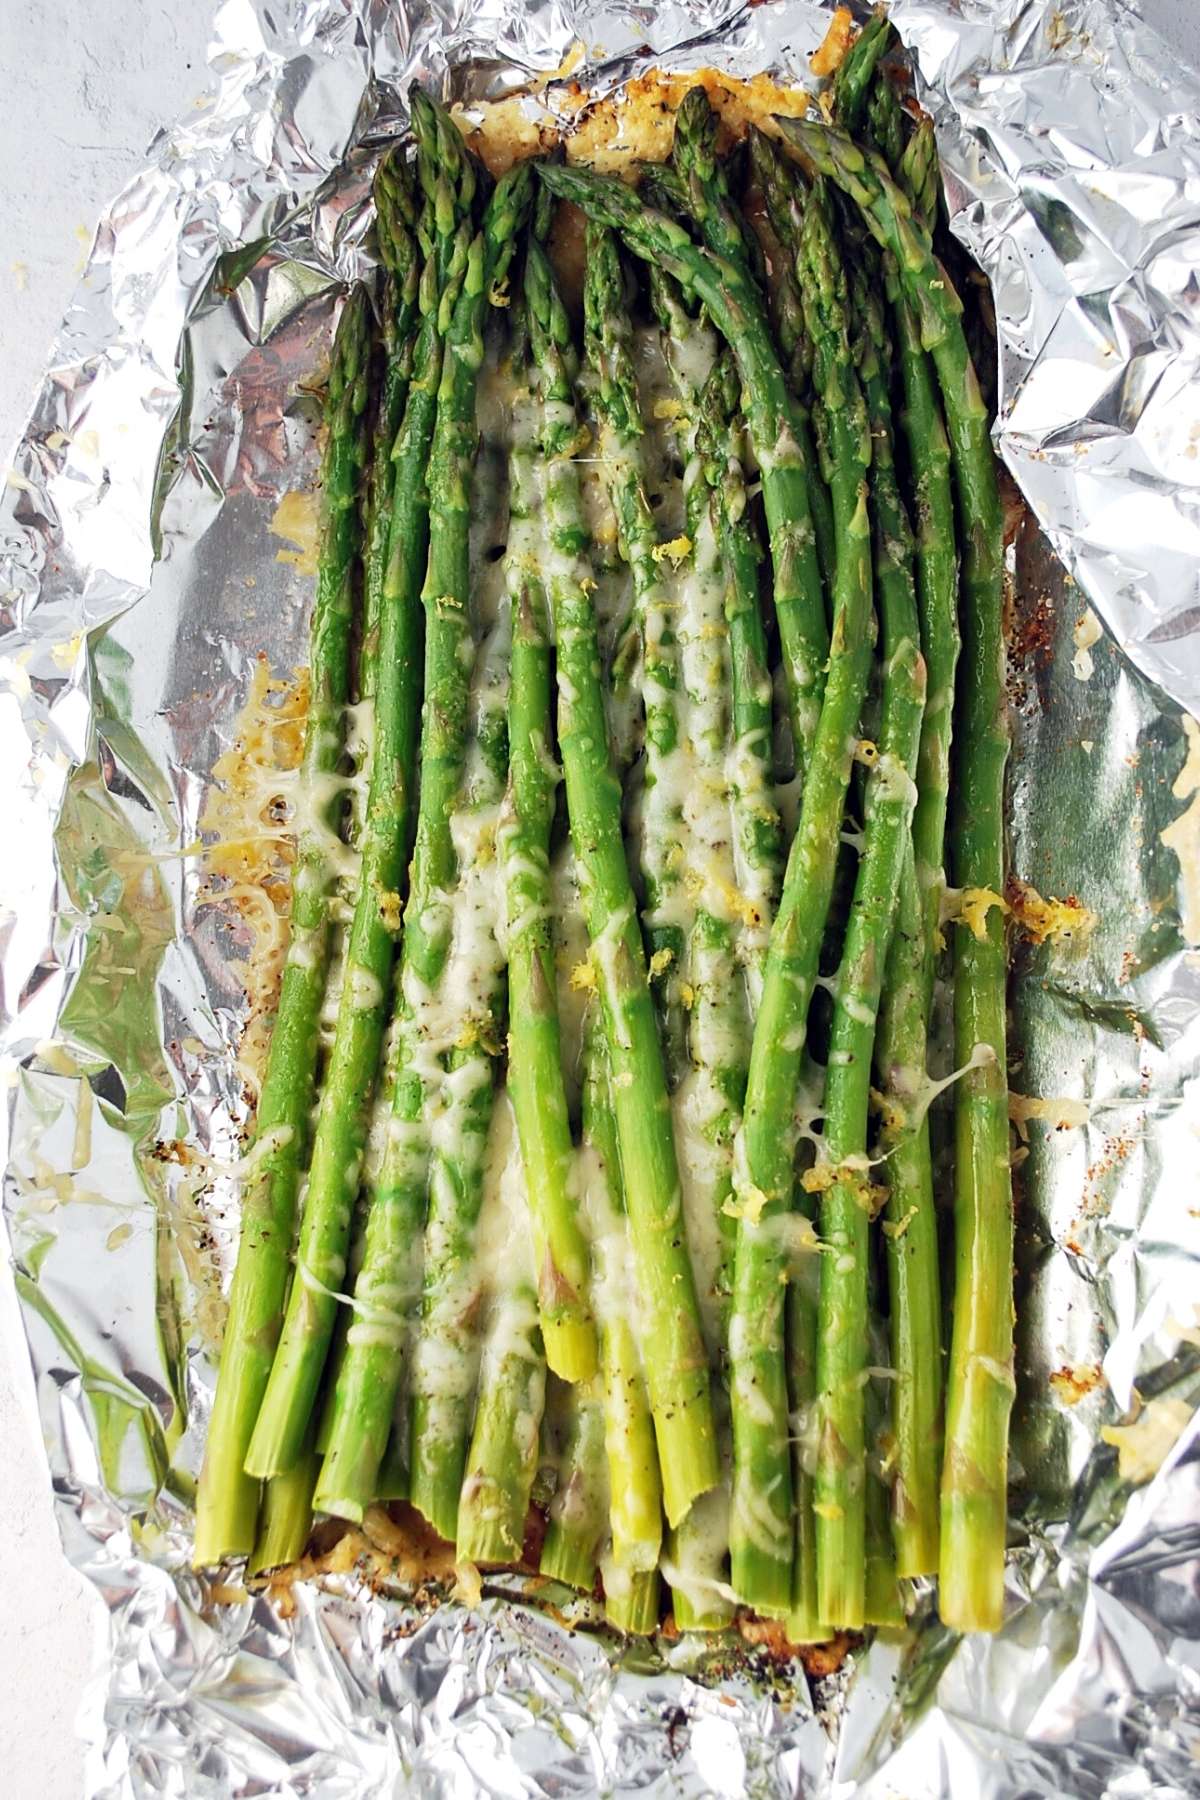 grilled asparagus cooked in a foil packet with melted cheese and lemon zest on top